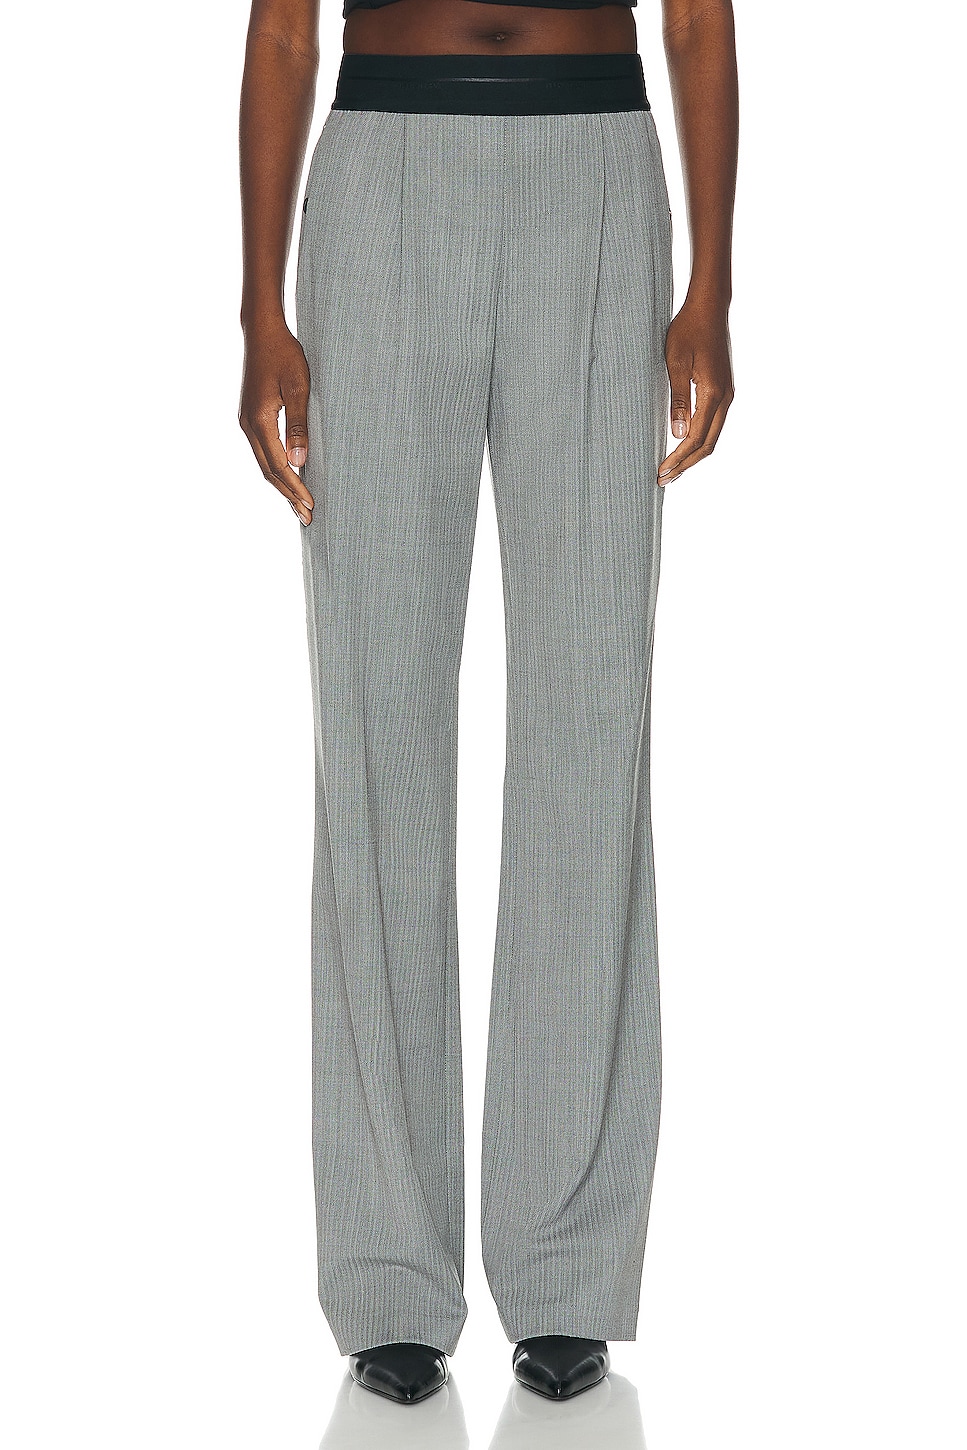 Image 1 of Helmut Lang Pull On Suit Pant in Black & White Multi